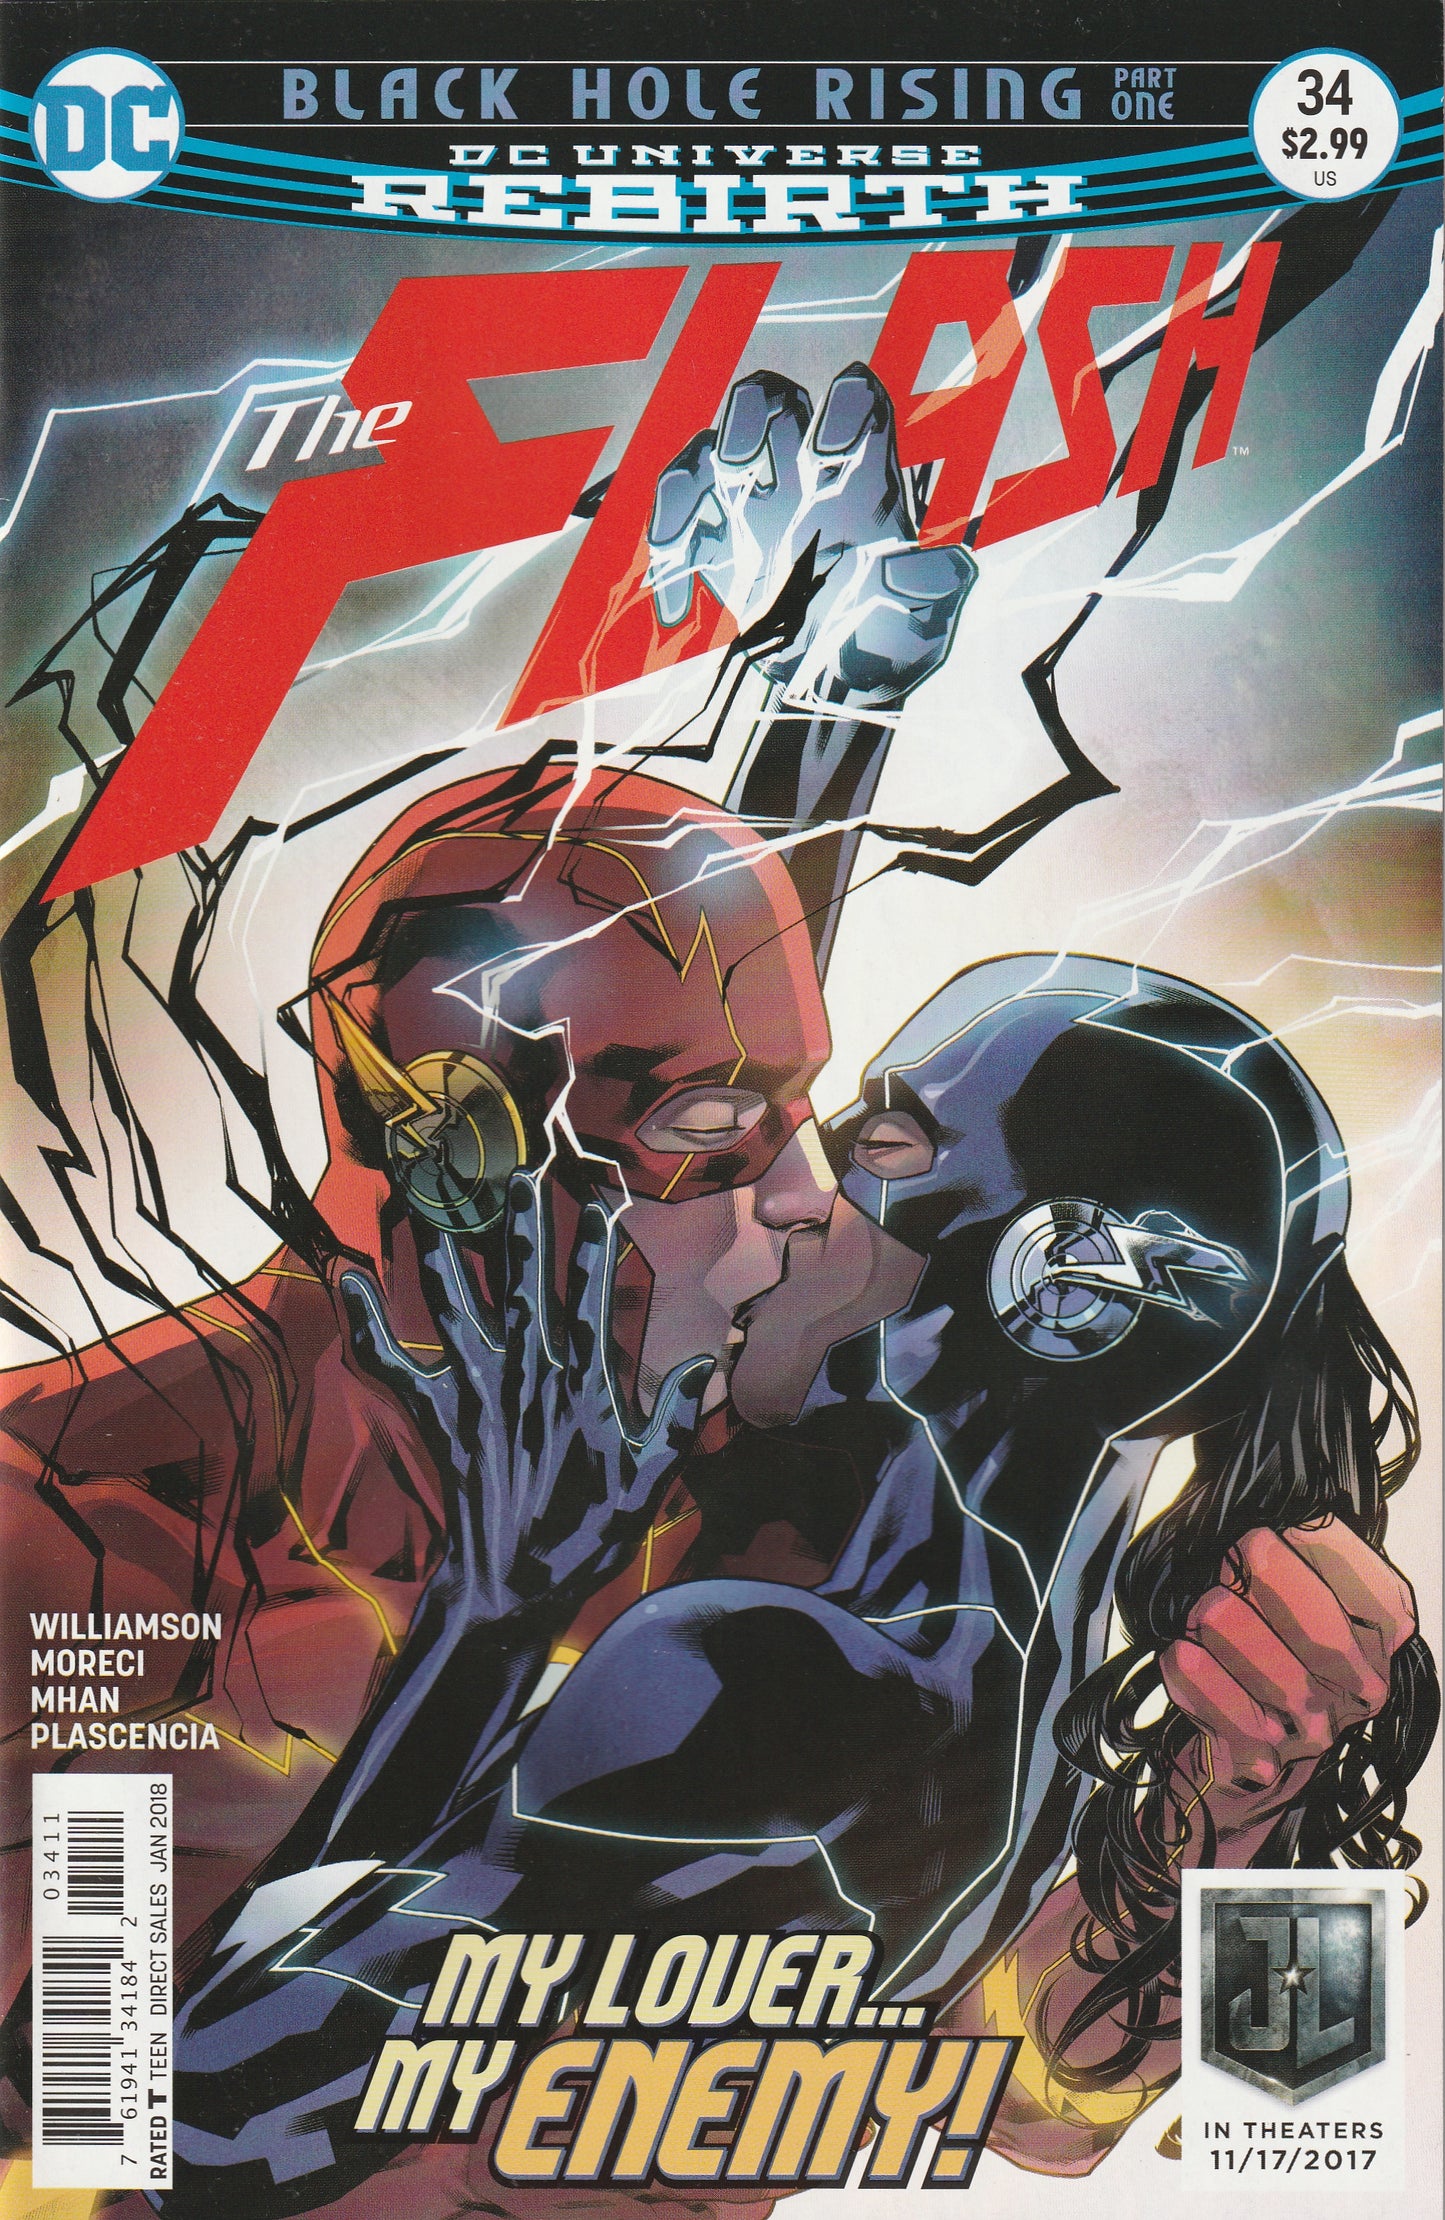 The Flash - Rebirth #34 (2018) - 1st Appearance of Fast Track, Meena Dhawan, as Negative Flash